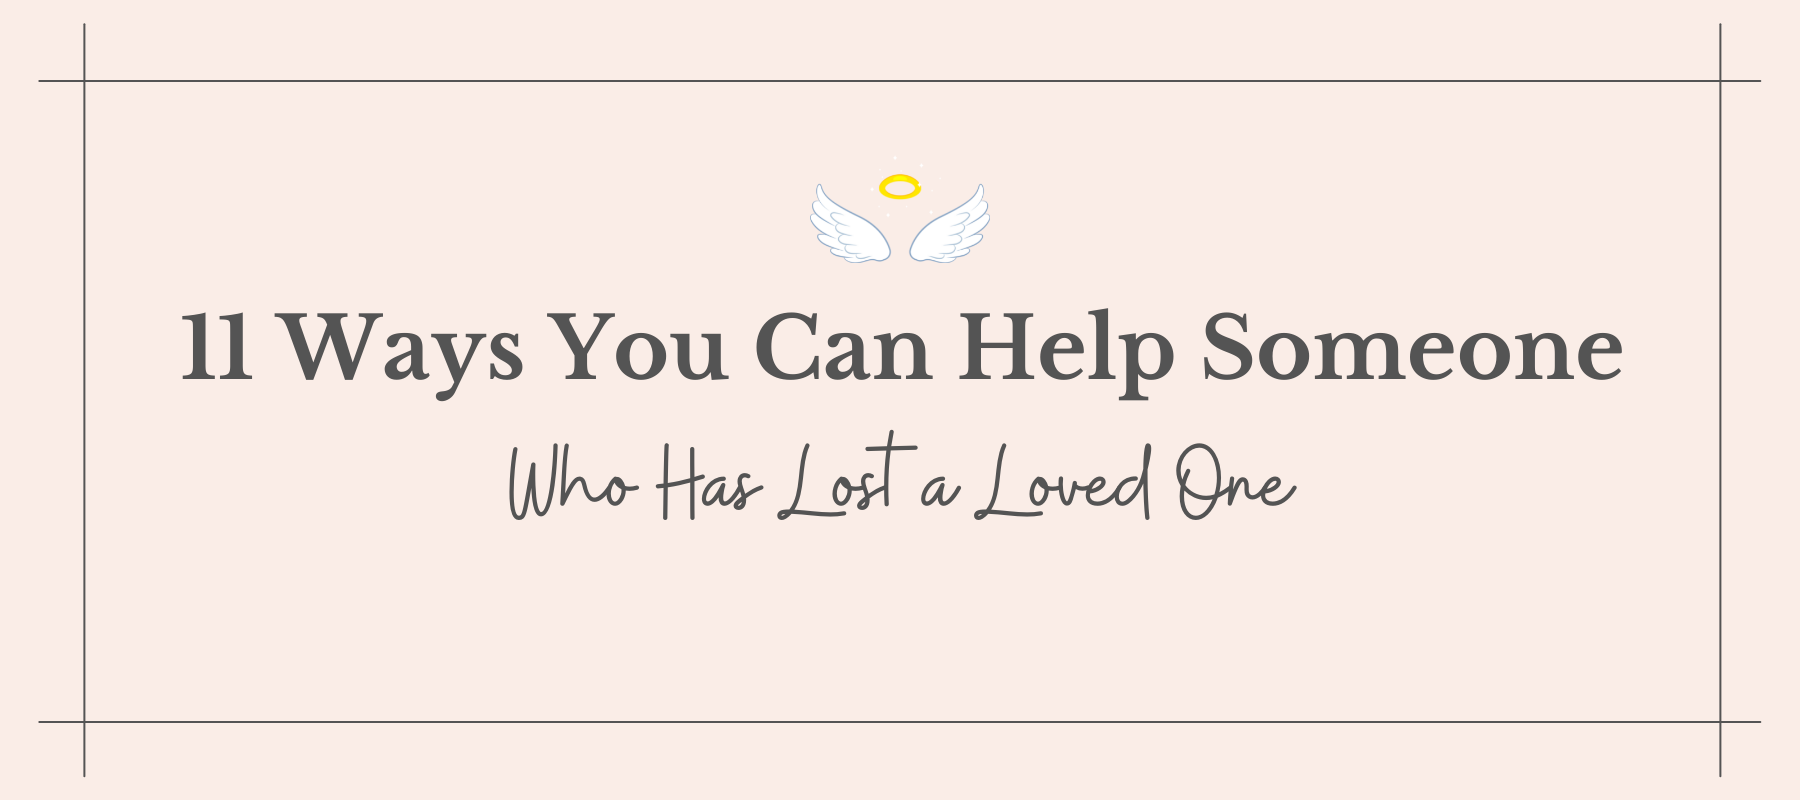 11 Ways You Can Help Someone Who Has Lost a Loved One